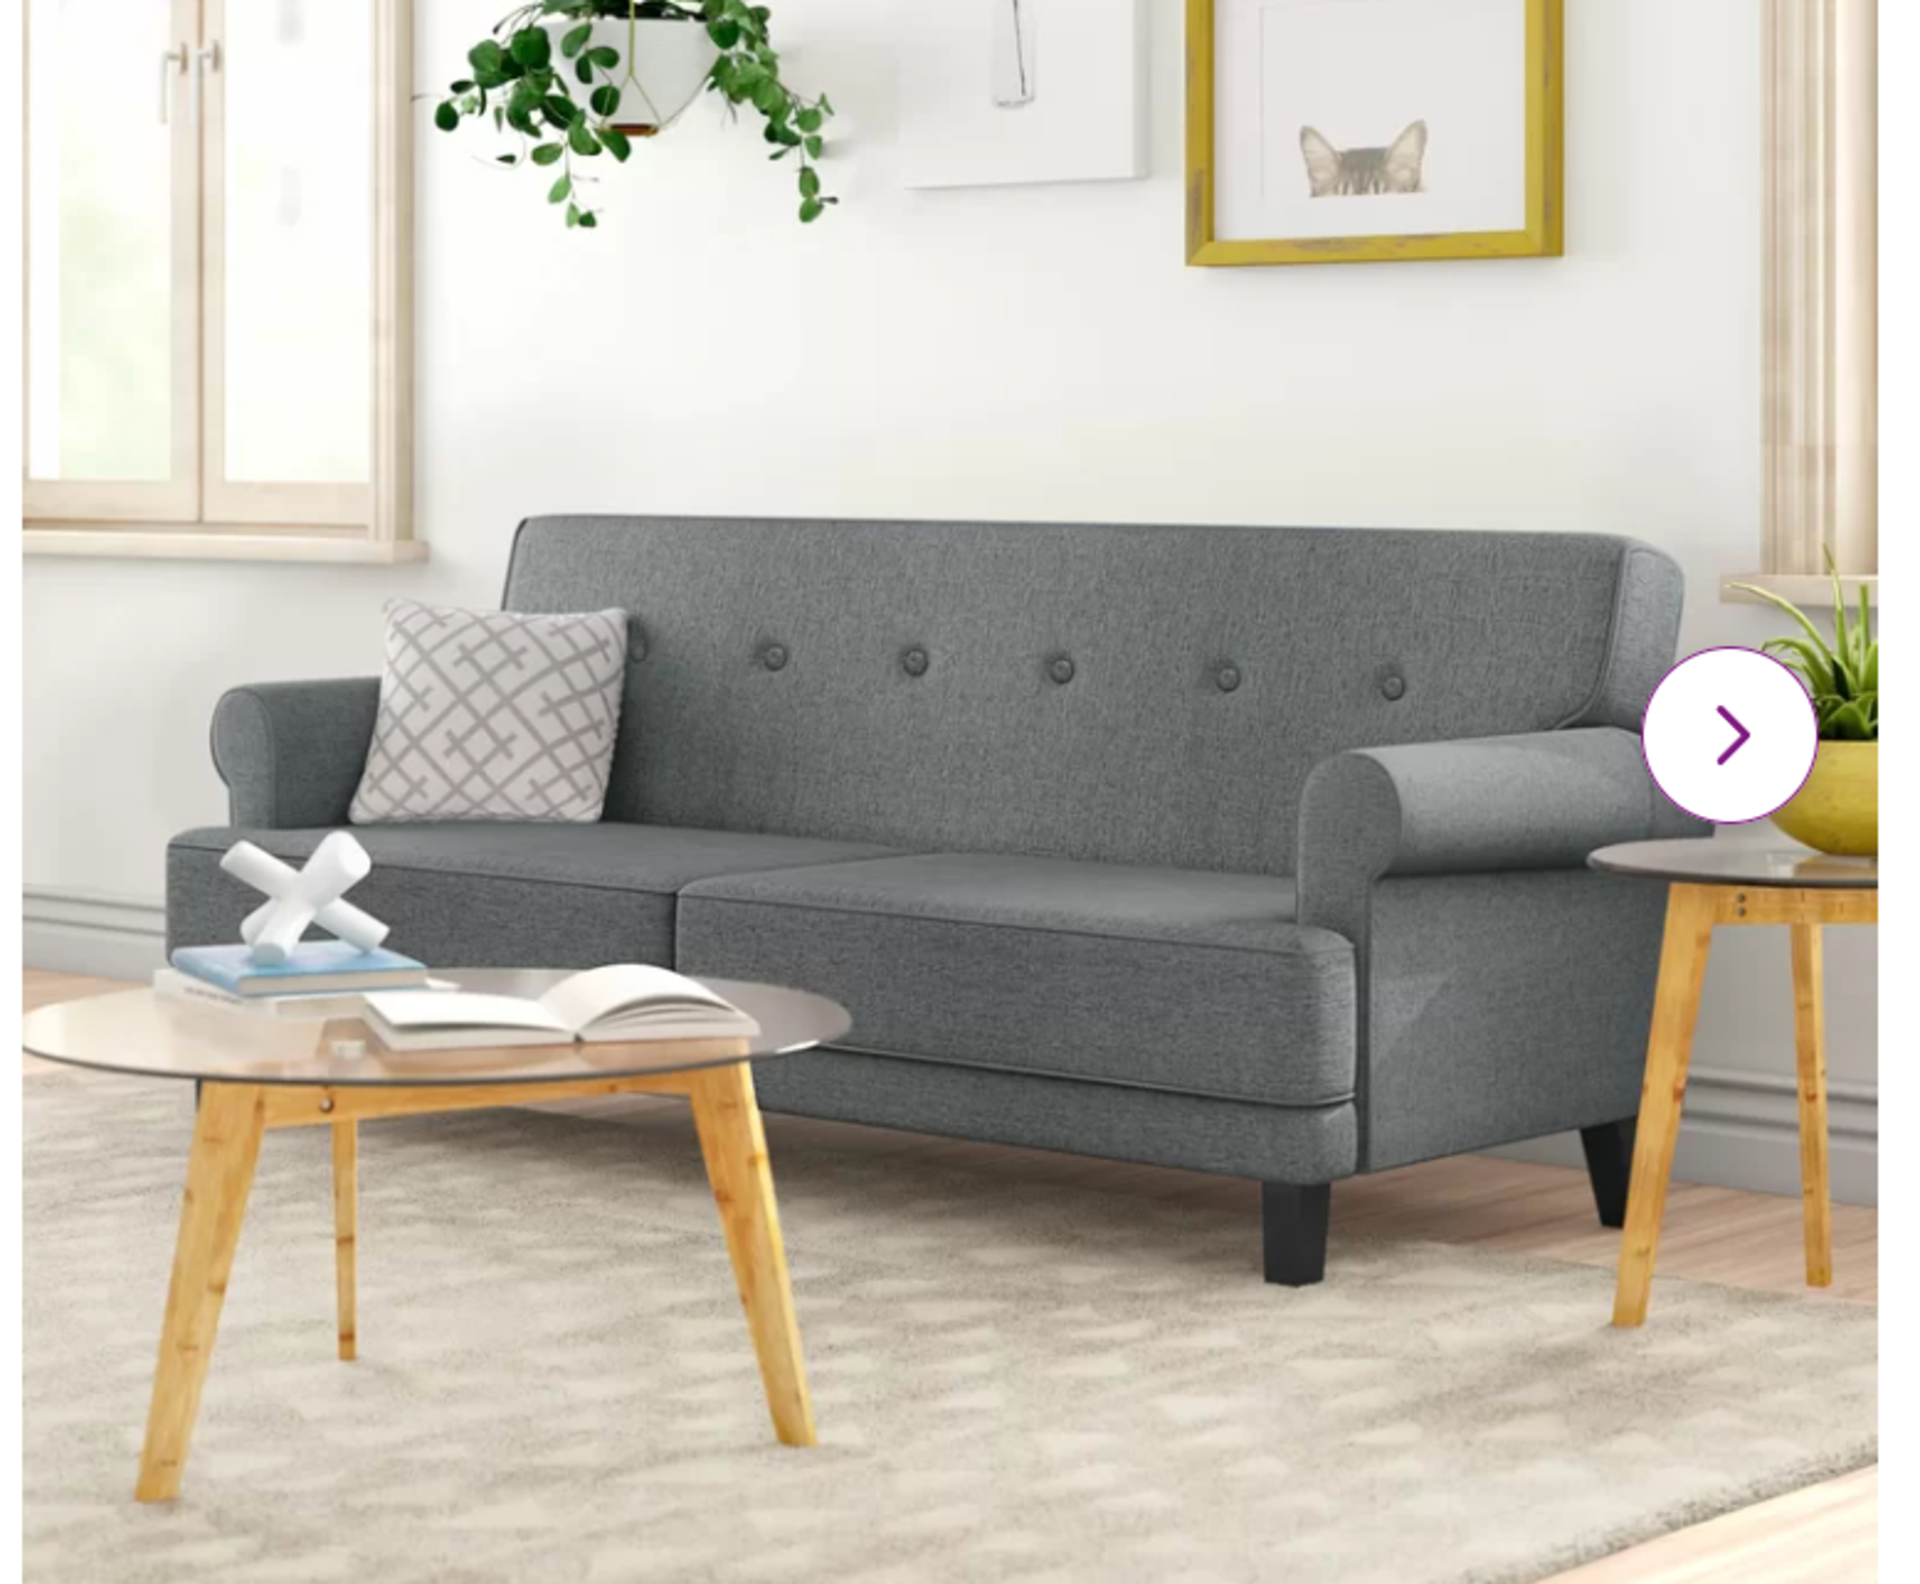 O'Leary 3 Seater Upholstered Sofa Bed. RRP £519.99. With a button back, scroll arms, and high